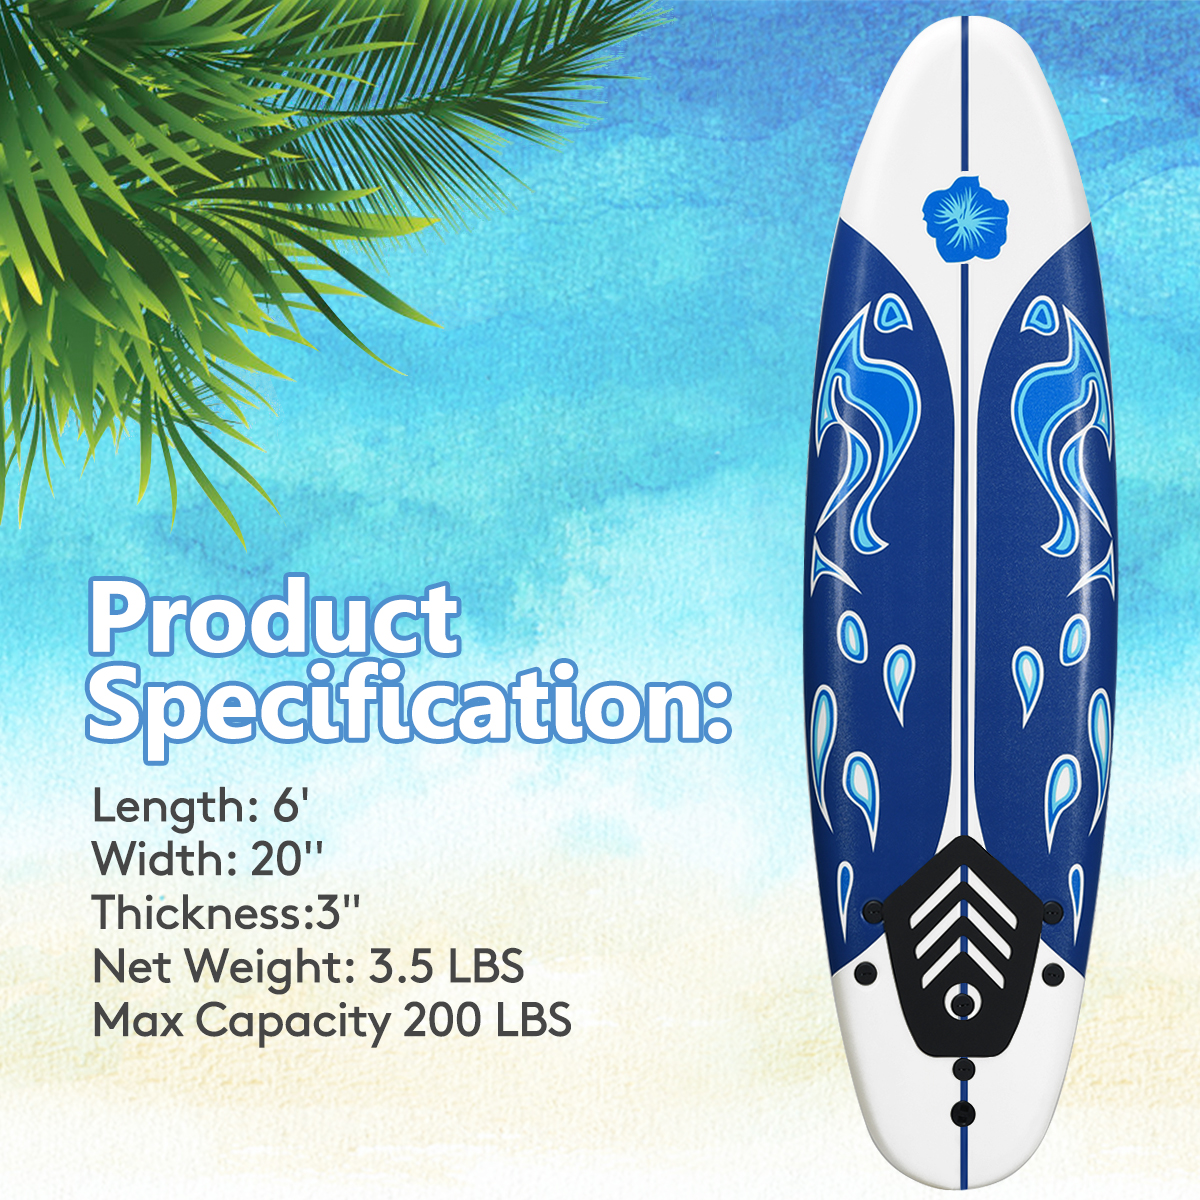 Topbuy 6' Surfboard Inflation-free Long Surfing Board with Safety Leash White